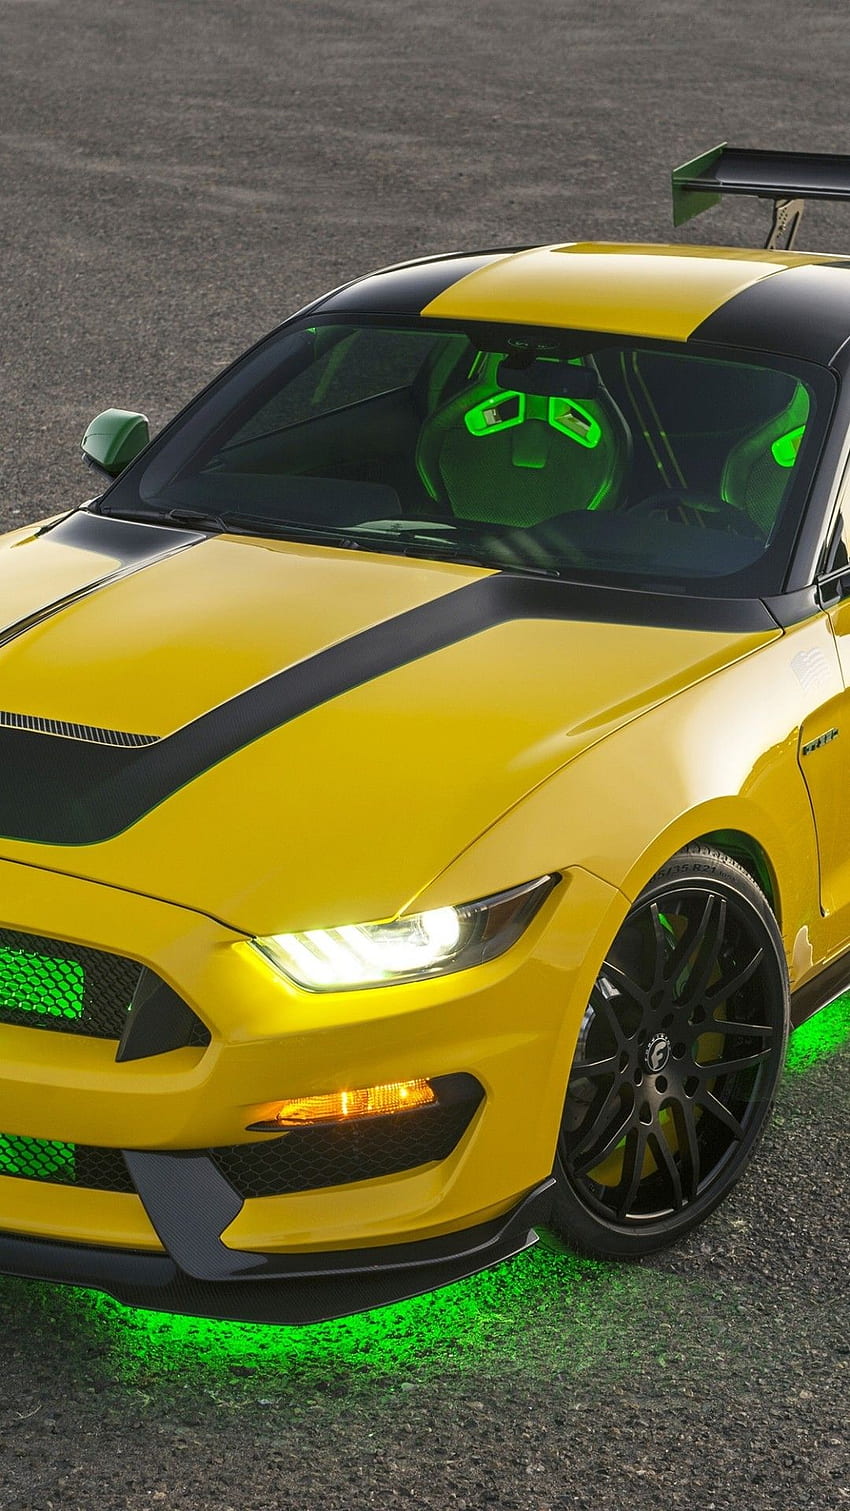 Ford Mustang Shelby Gt500, Yellow, Neon Lights, 車 for iPhone 8, iPhone 7 Plus, iPhone 6+, Sony Xperia Z, HTC One - Maiden HD電話の壁紙